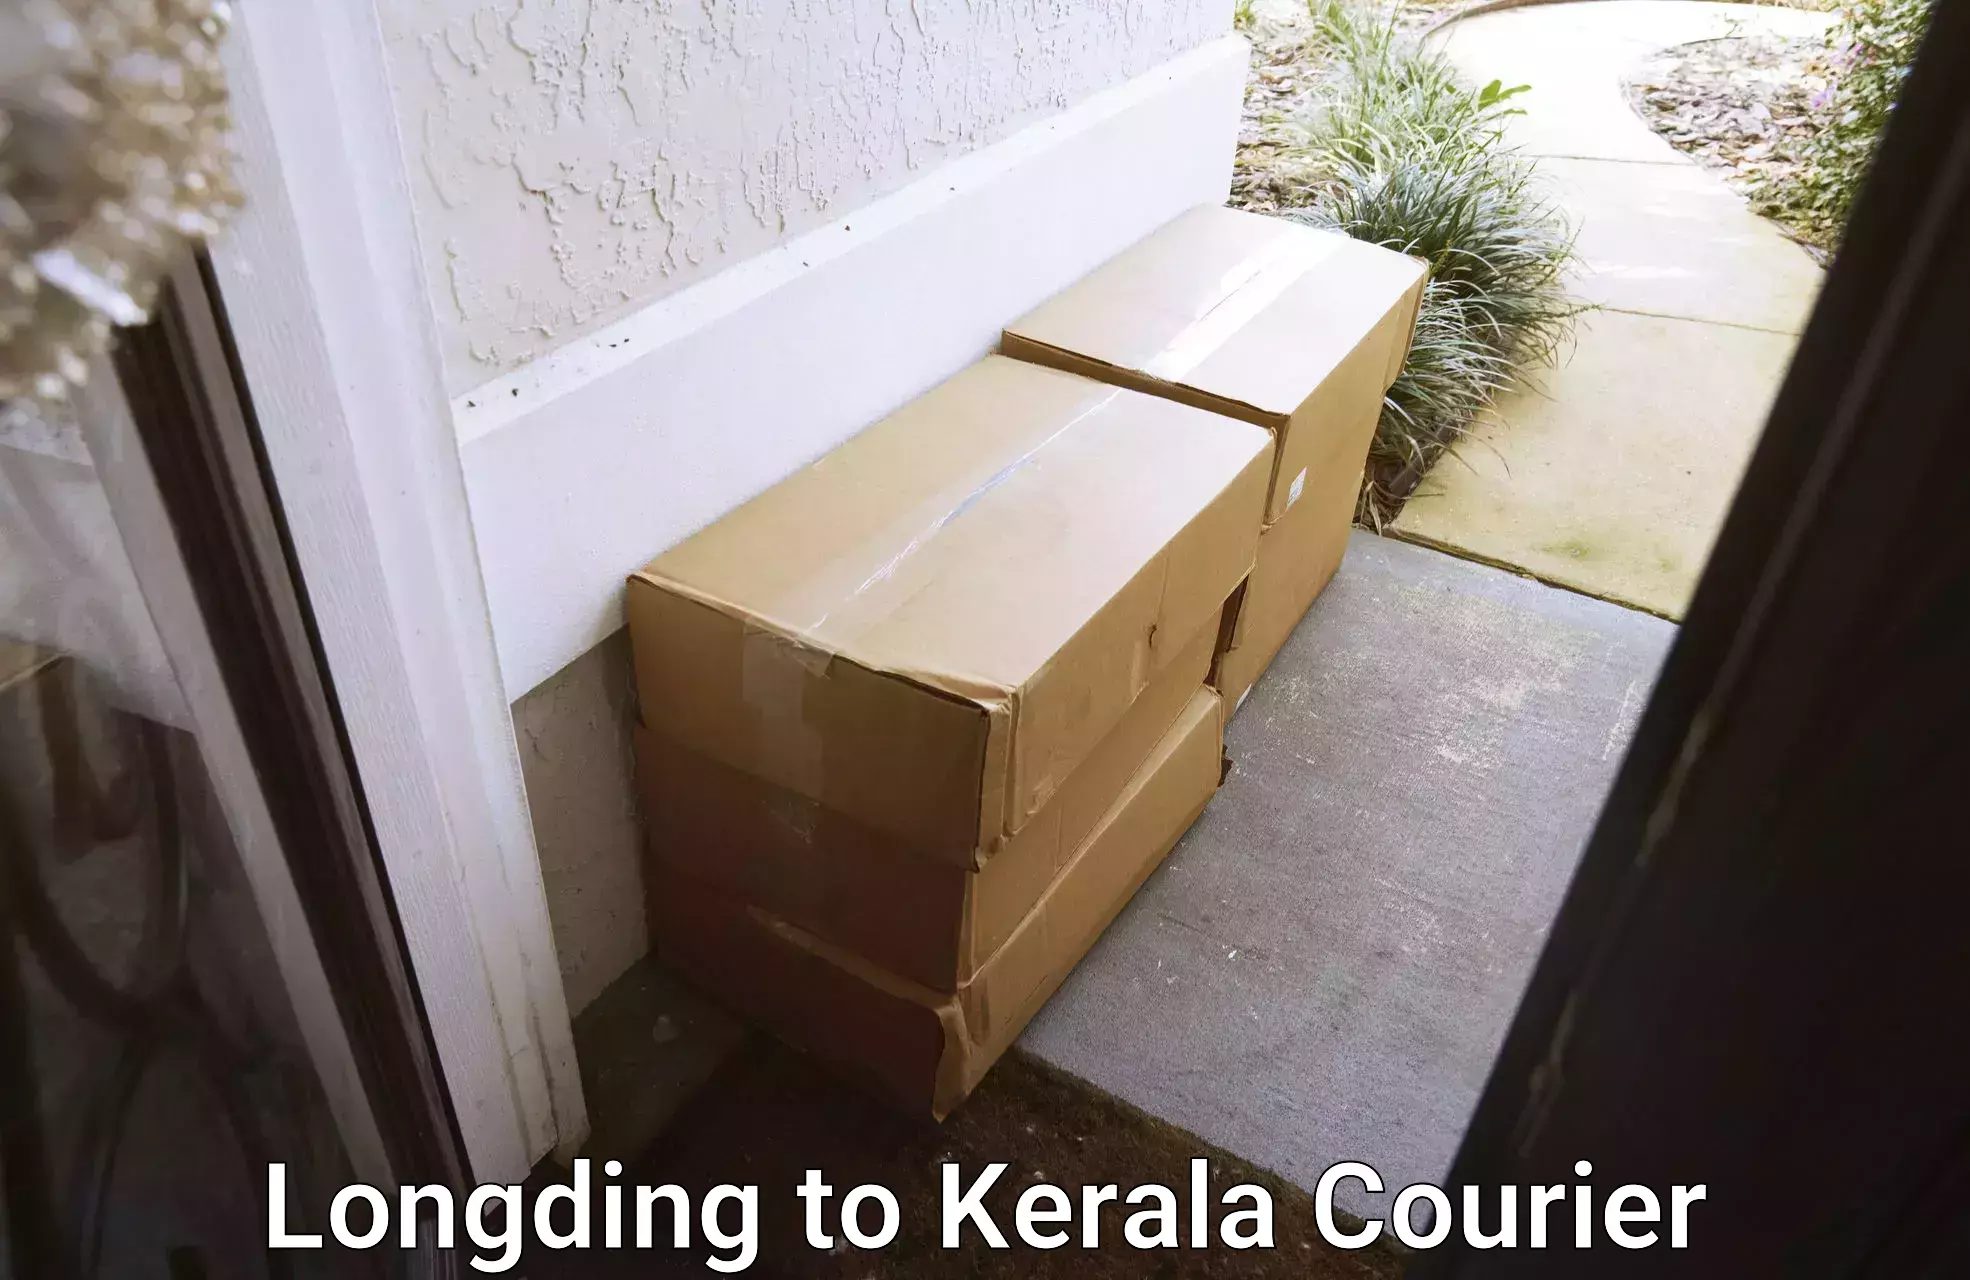 Door-to-door shipment Longding to Cochin University of Science and Technology